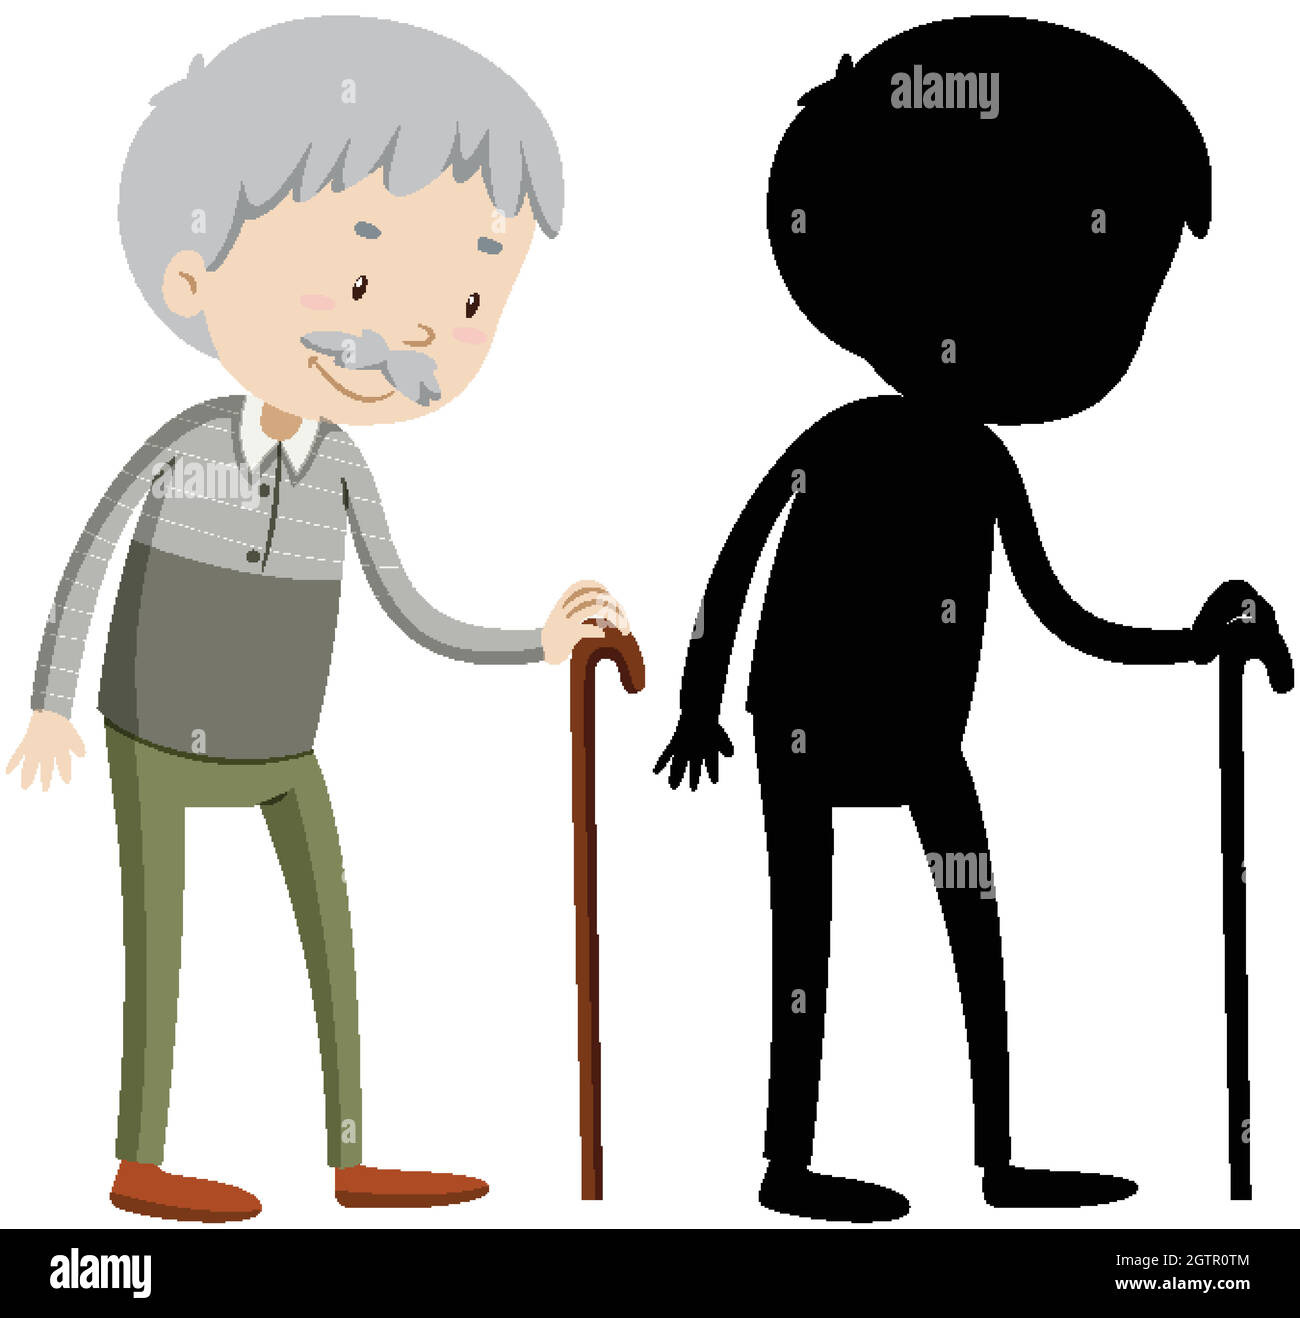 Old man with its silhouette Stock Vector